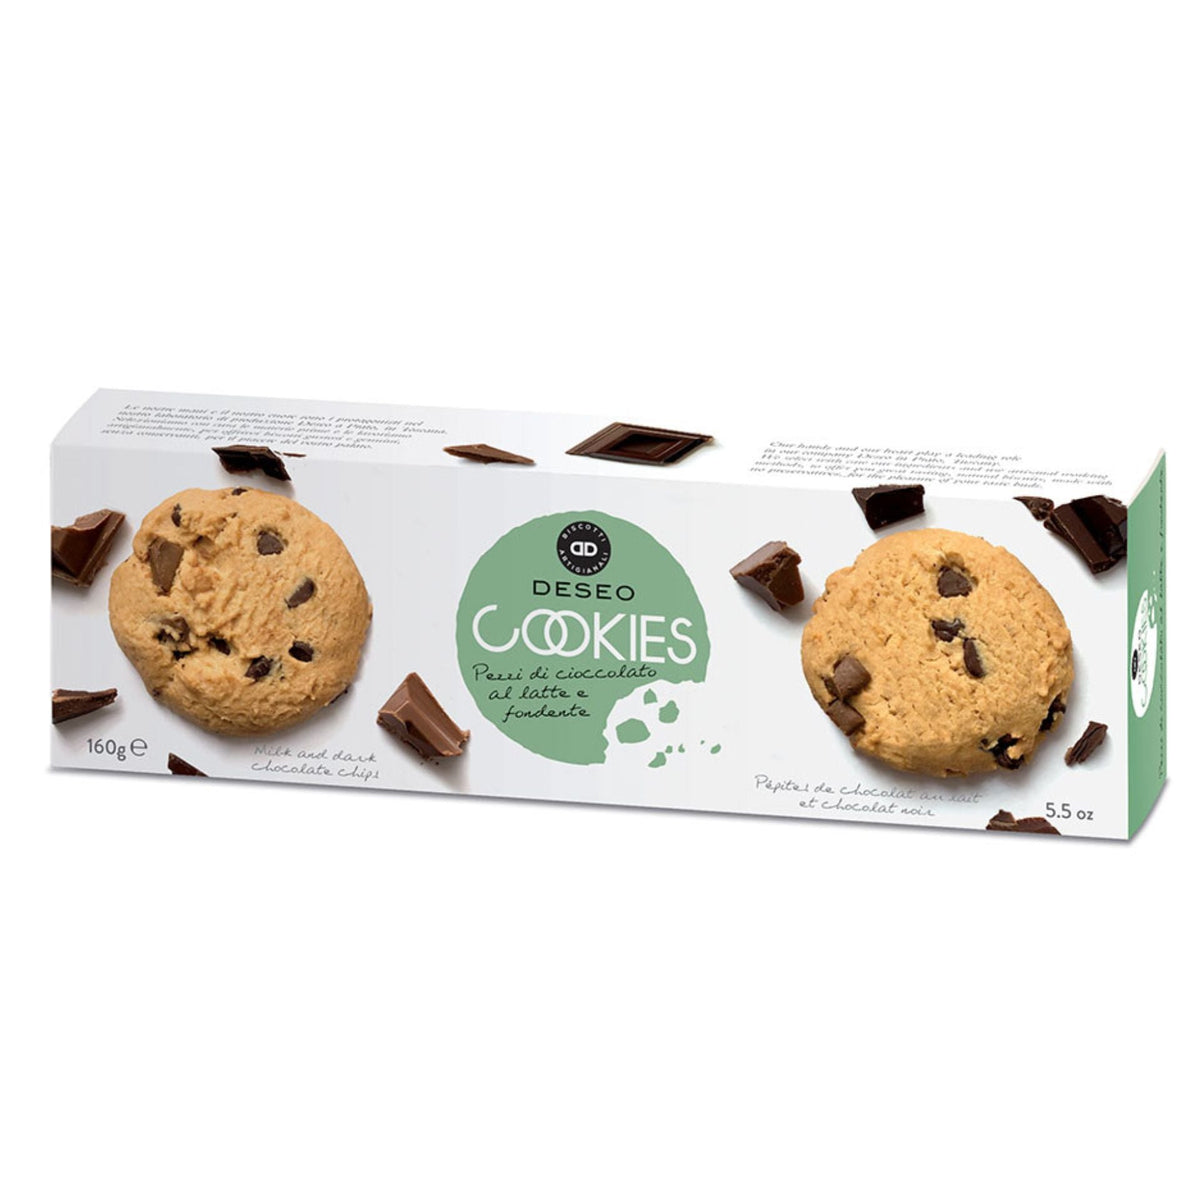 Deseo Chocolate Chip Cookies 160g (Box)  | Imported and distributed in the UK by Just Gourmet Foods